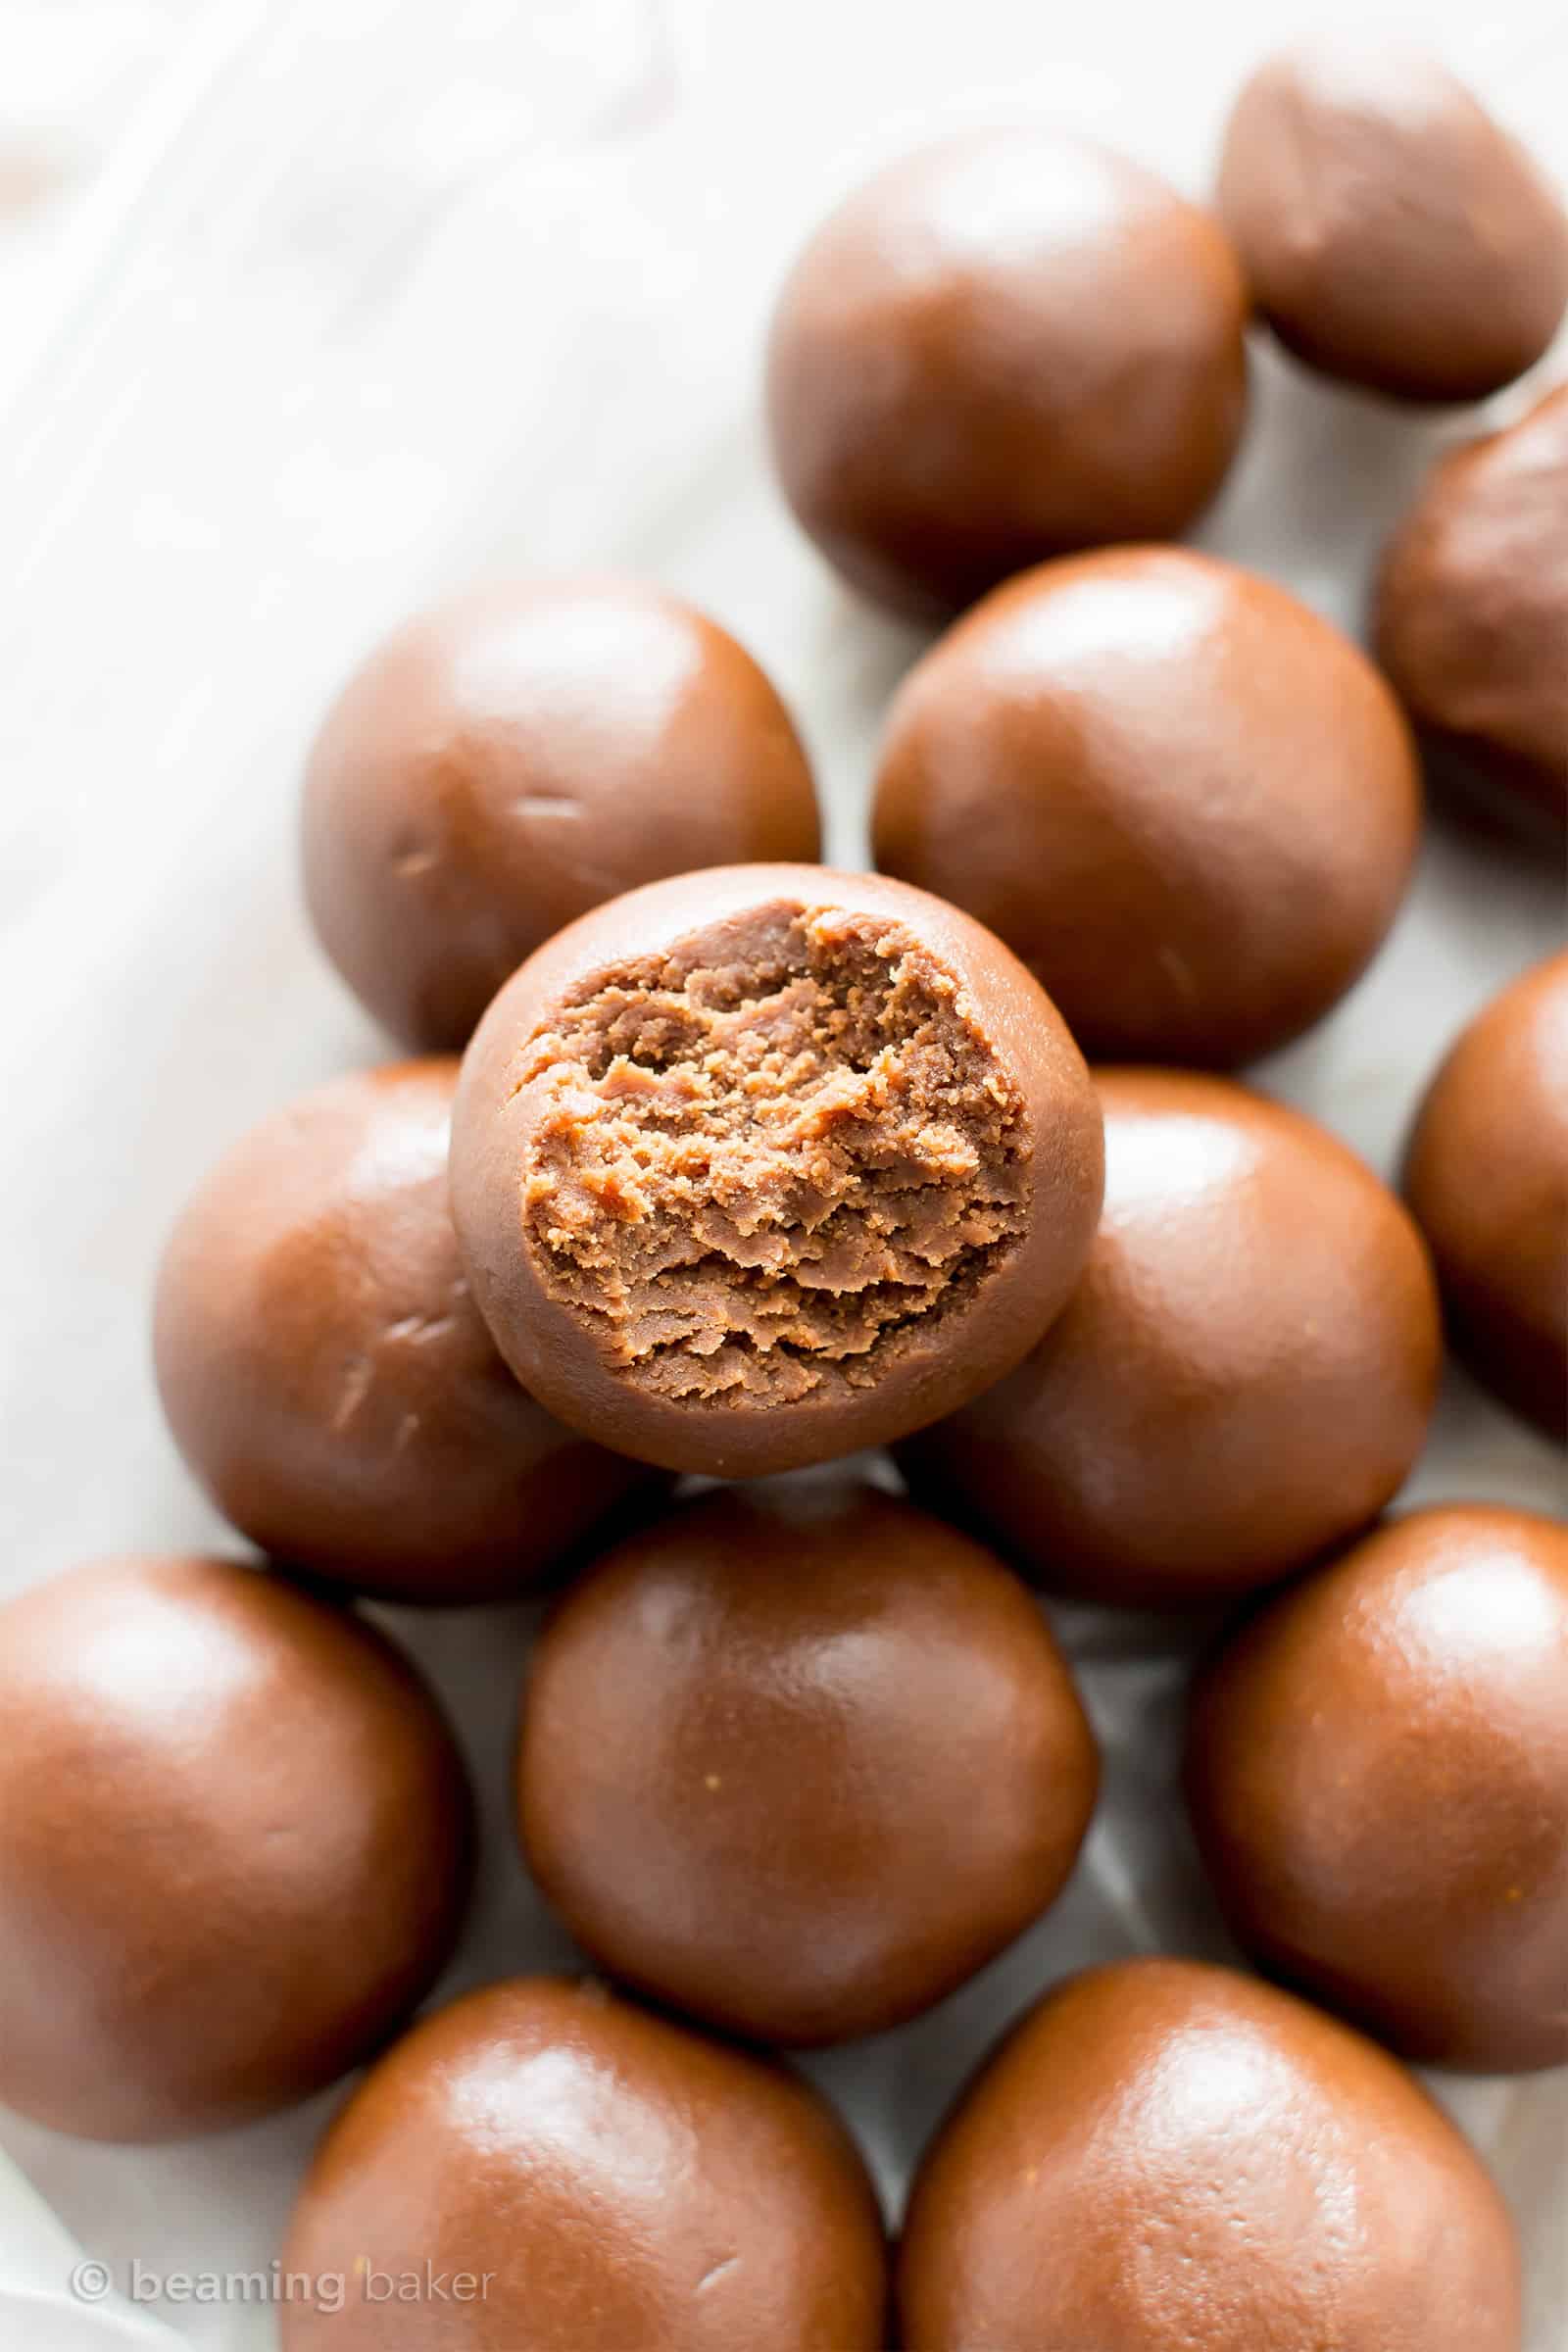 4 Ingredient Chocolate Peanut Butter No Bake Energy Bites Recipe (V, GF): an easy, one bowl recipe for irresistible no bake bites packed with peanut butter and chocolate flavor! #Vegan #GlutenFree #DairyFree #PeanutButter #Chocolate #NoBake #Snacks | Recipe on BeamingBaker.com